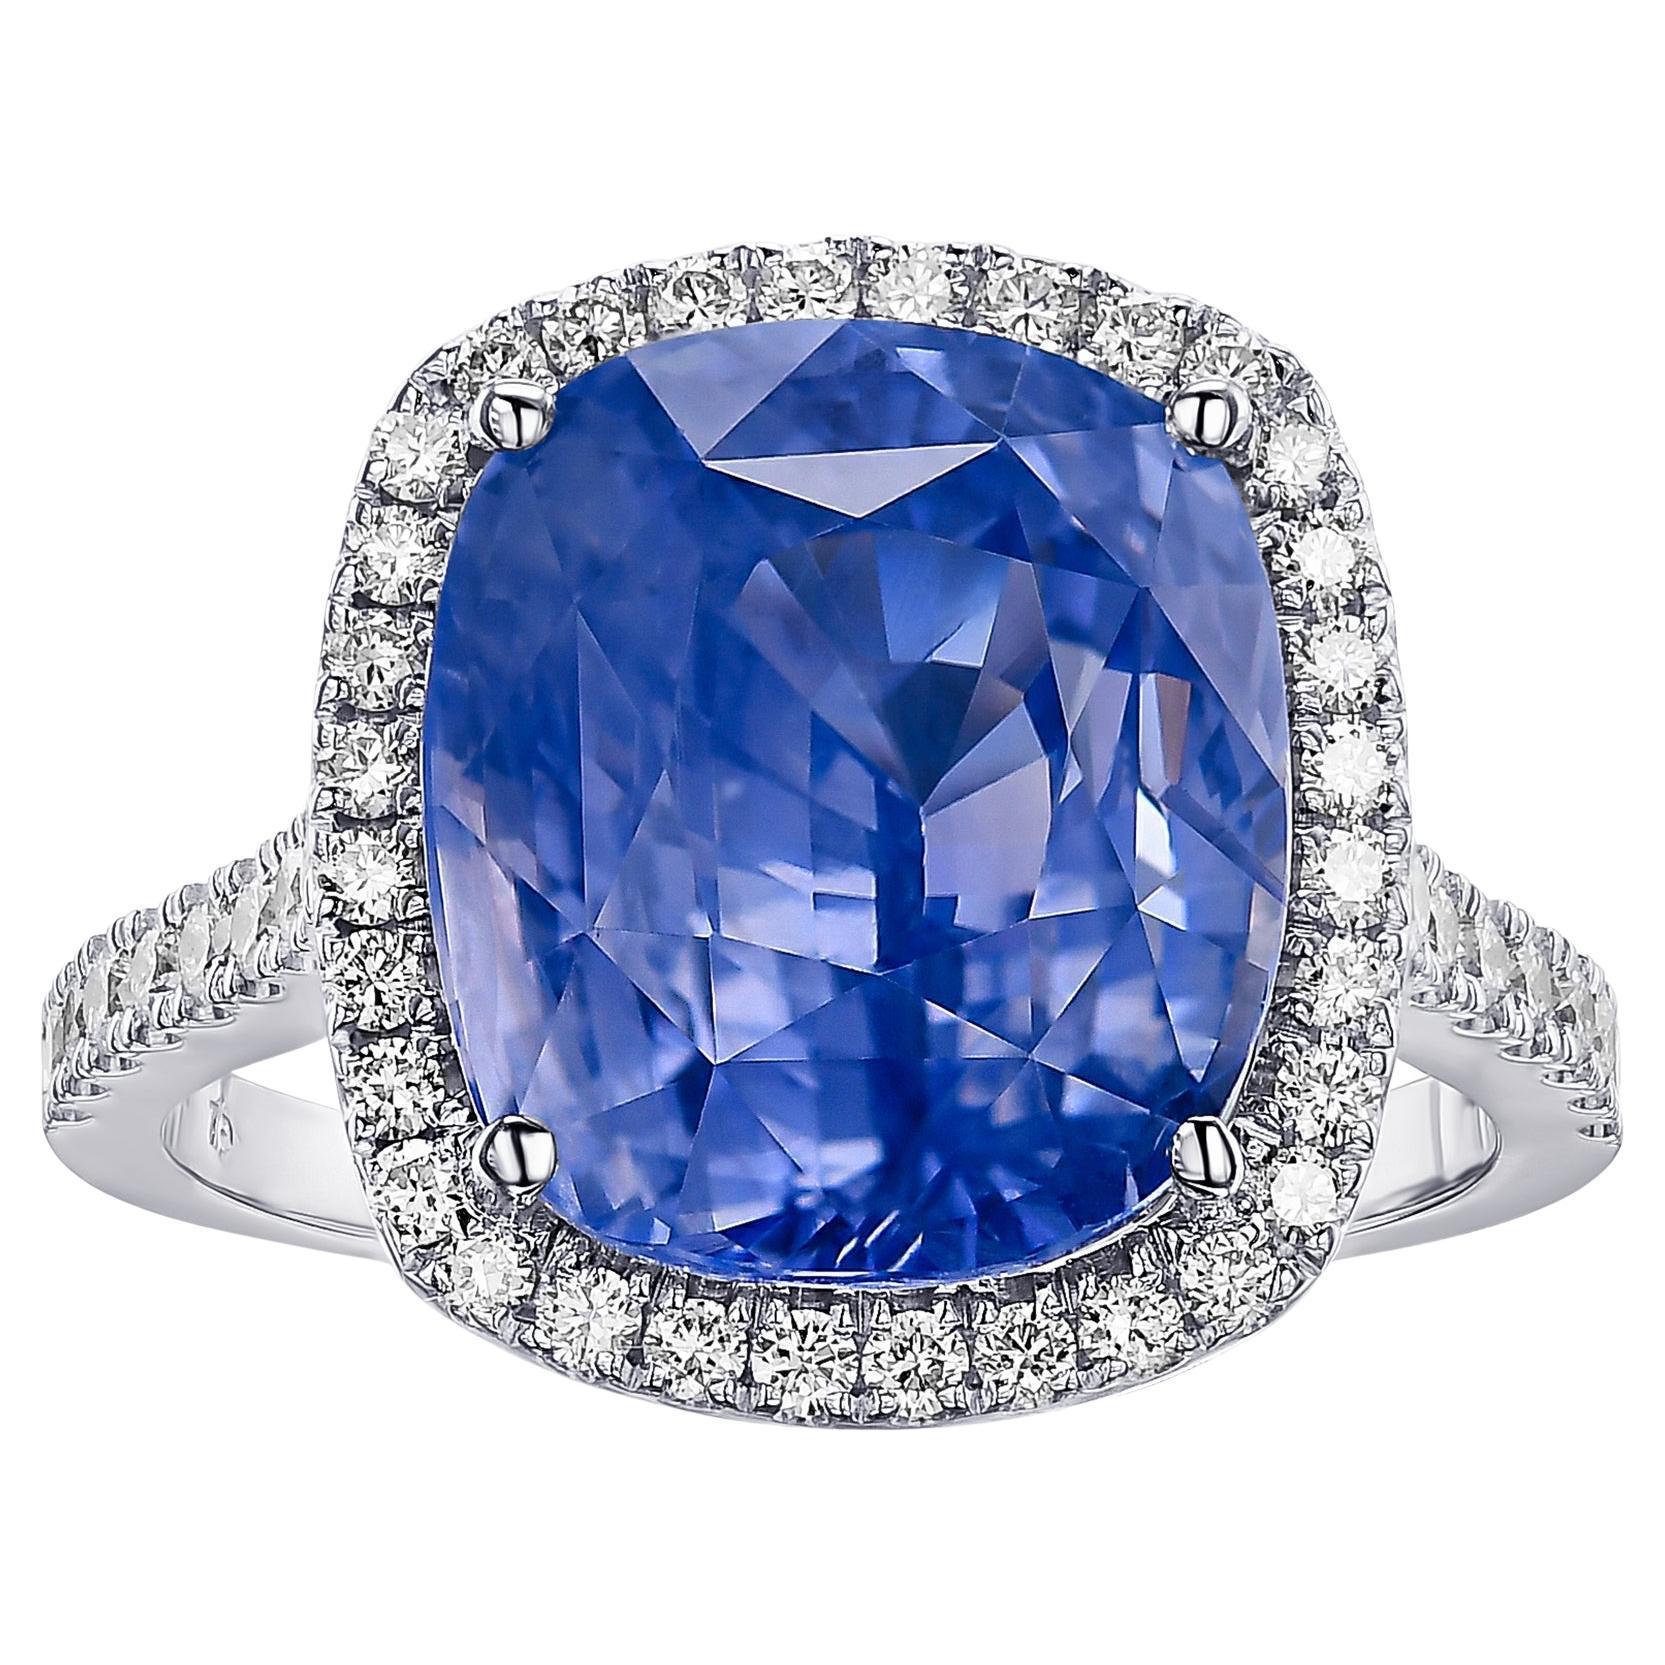 This one of a kind piece features a magnificent 12.11 carat rectangular cushion mixed cut sapphire with excellent clarity and brilliance, adorned natural diamonds of high quality. A perfect gift to yourself or your loved one, act now!

High quality